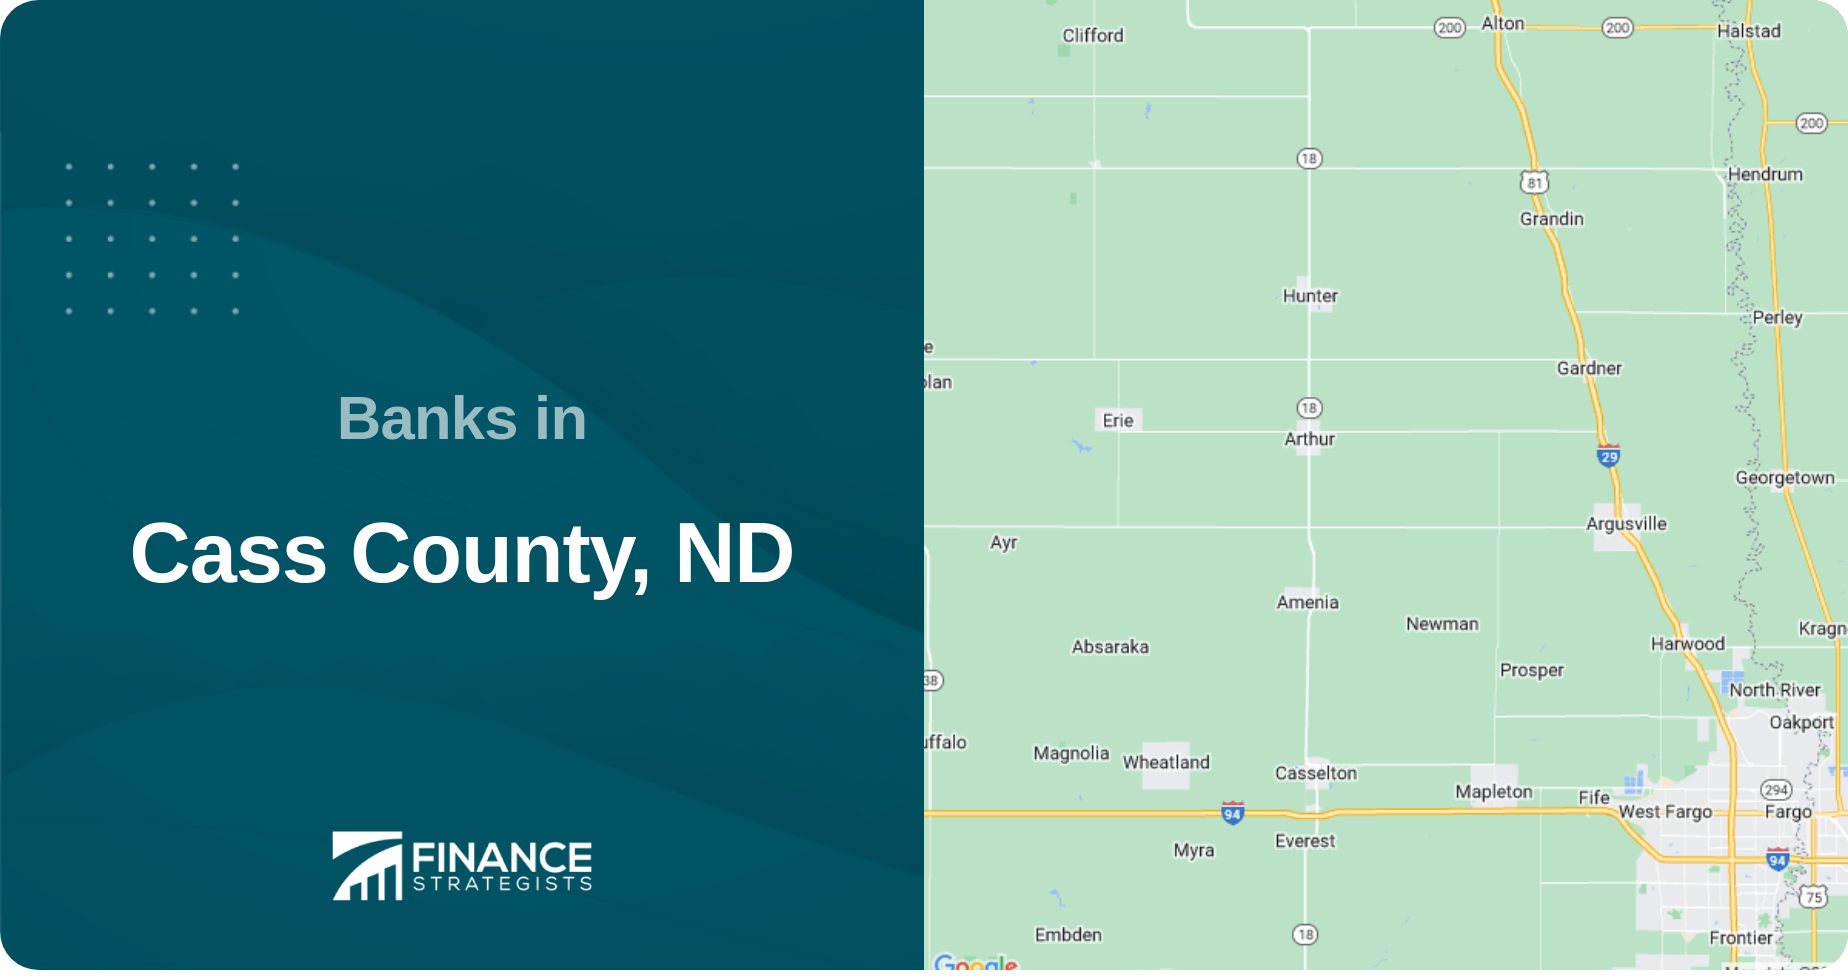 Banks in Cass County, ND